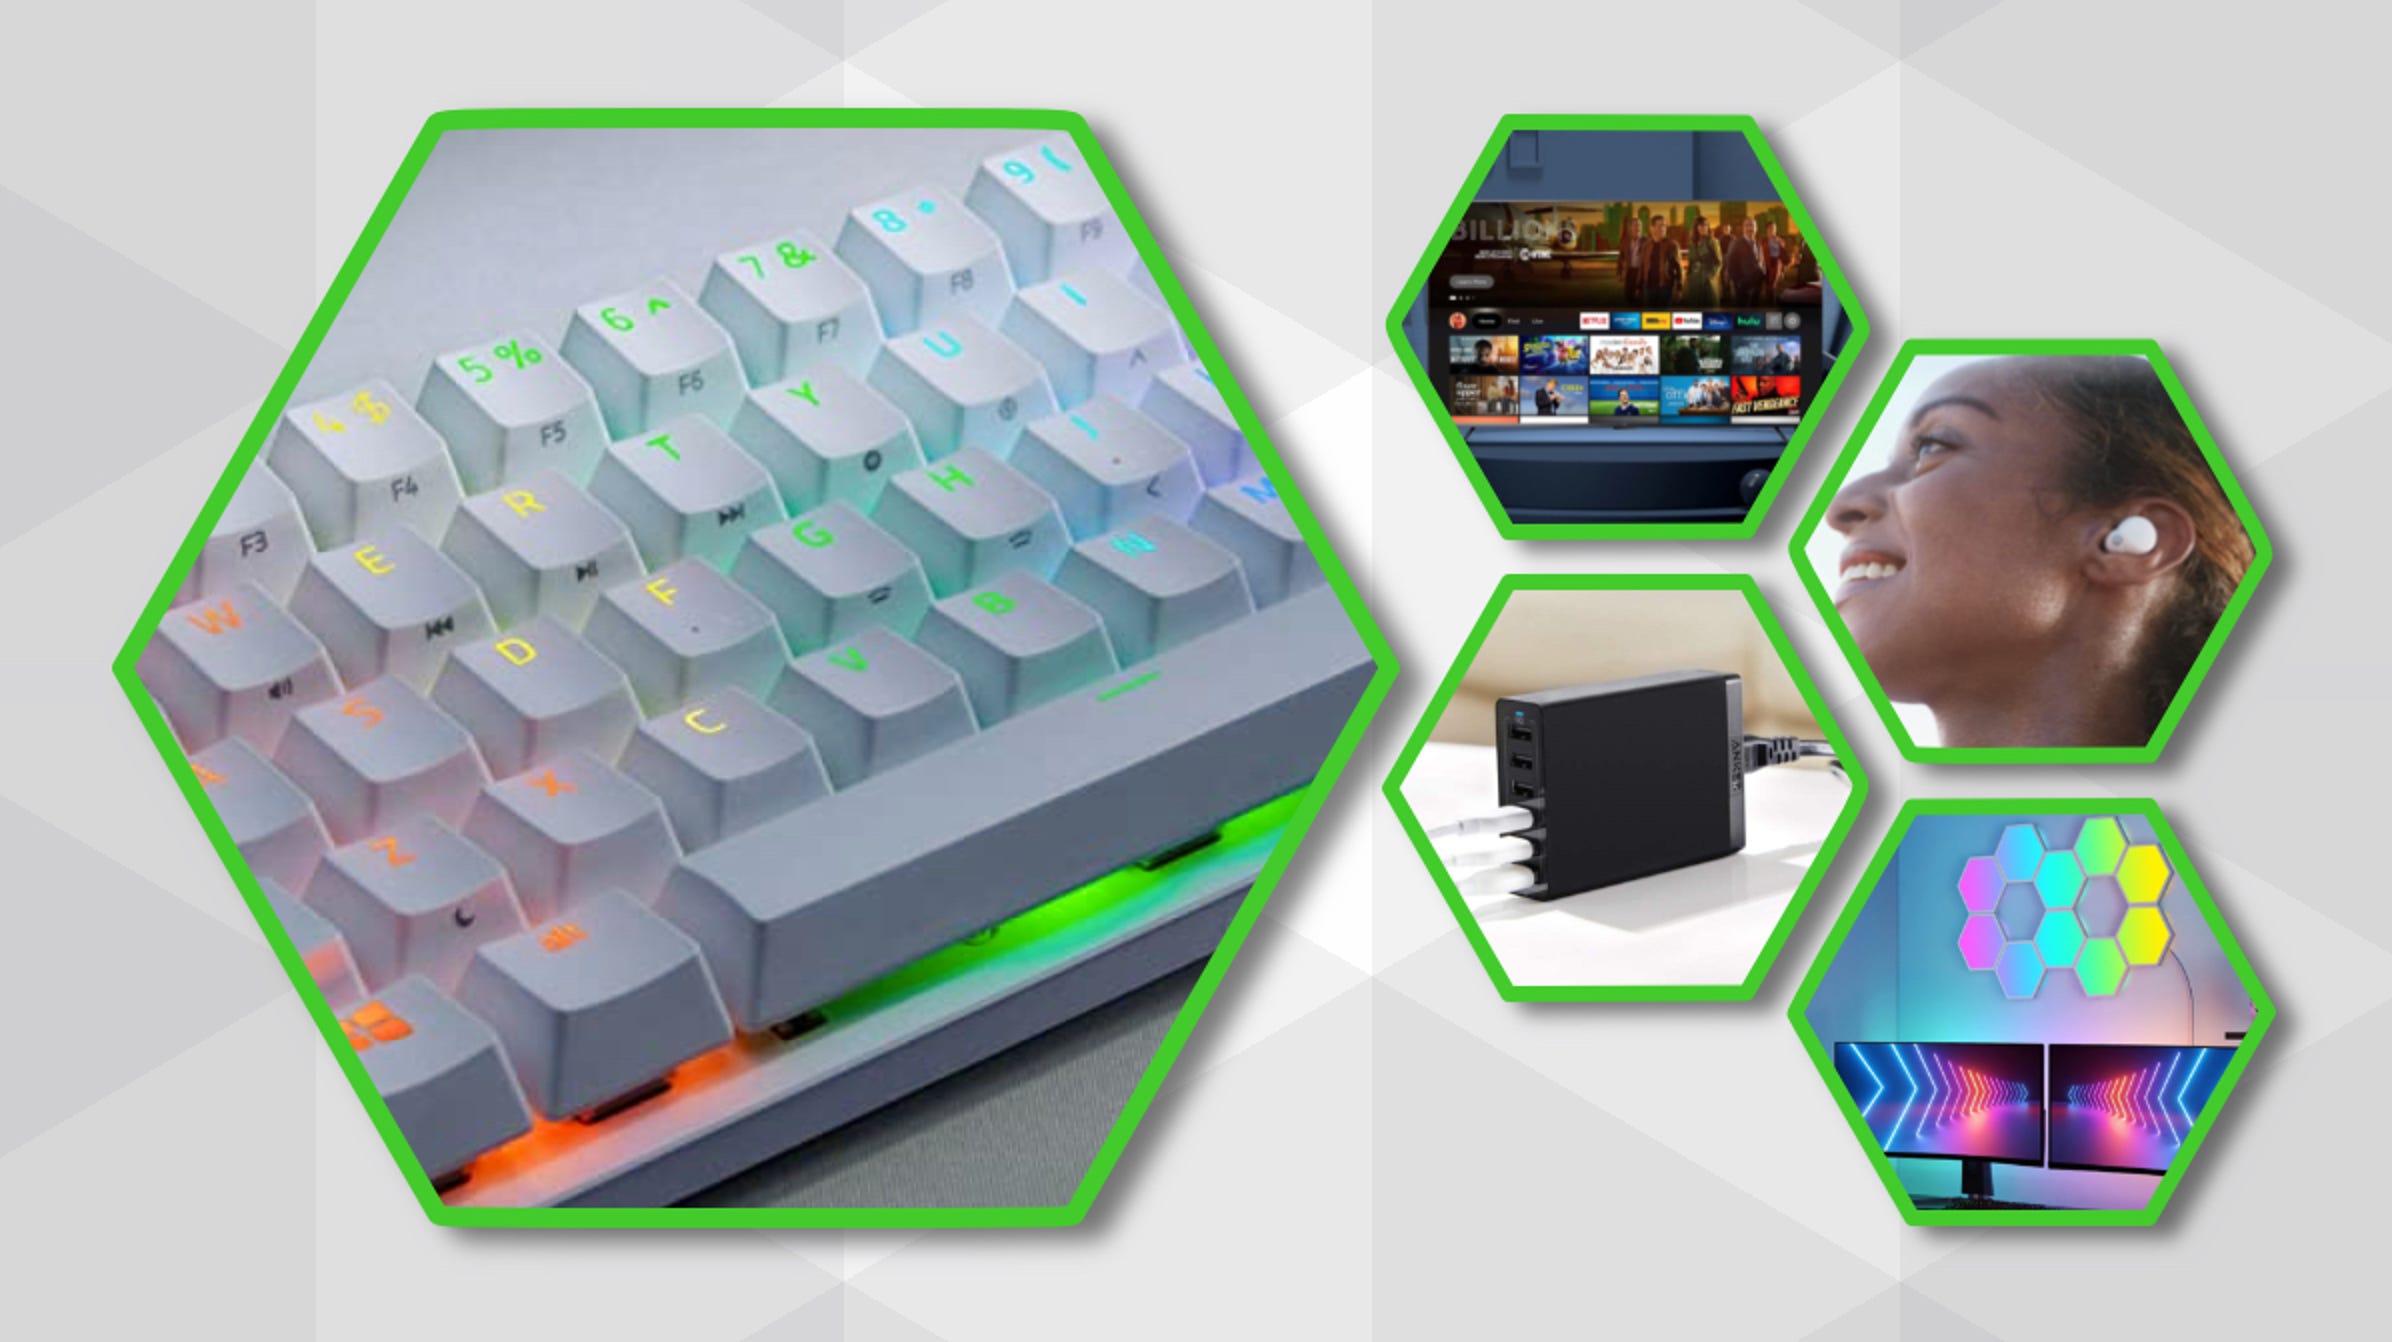 HTG Deals: Save Big on Razer Mechanical Keyboards, Mice, and More